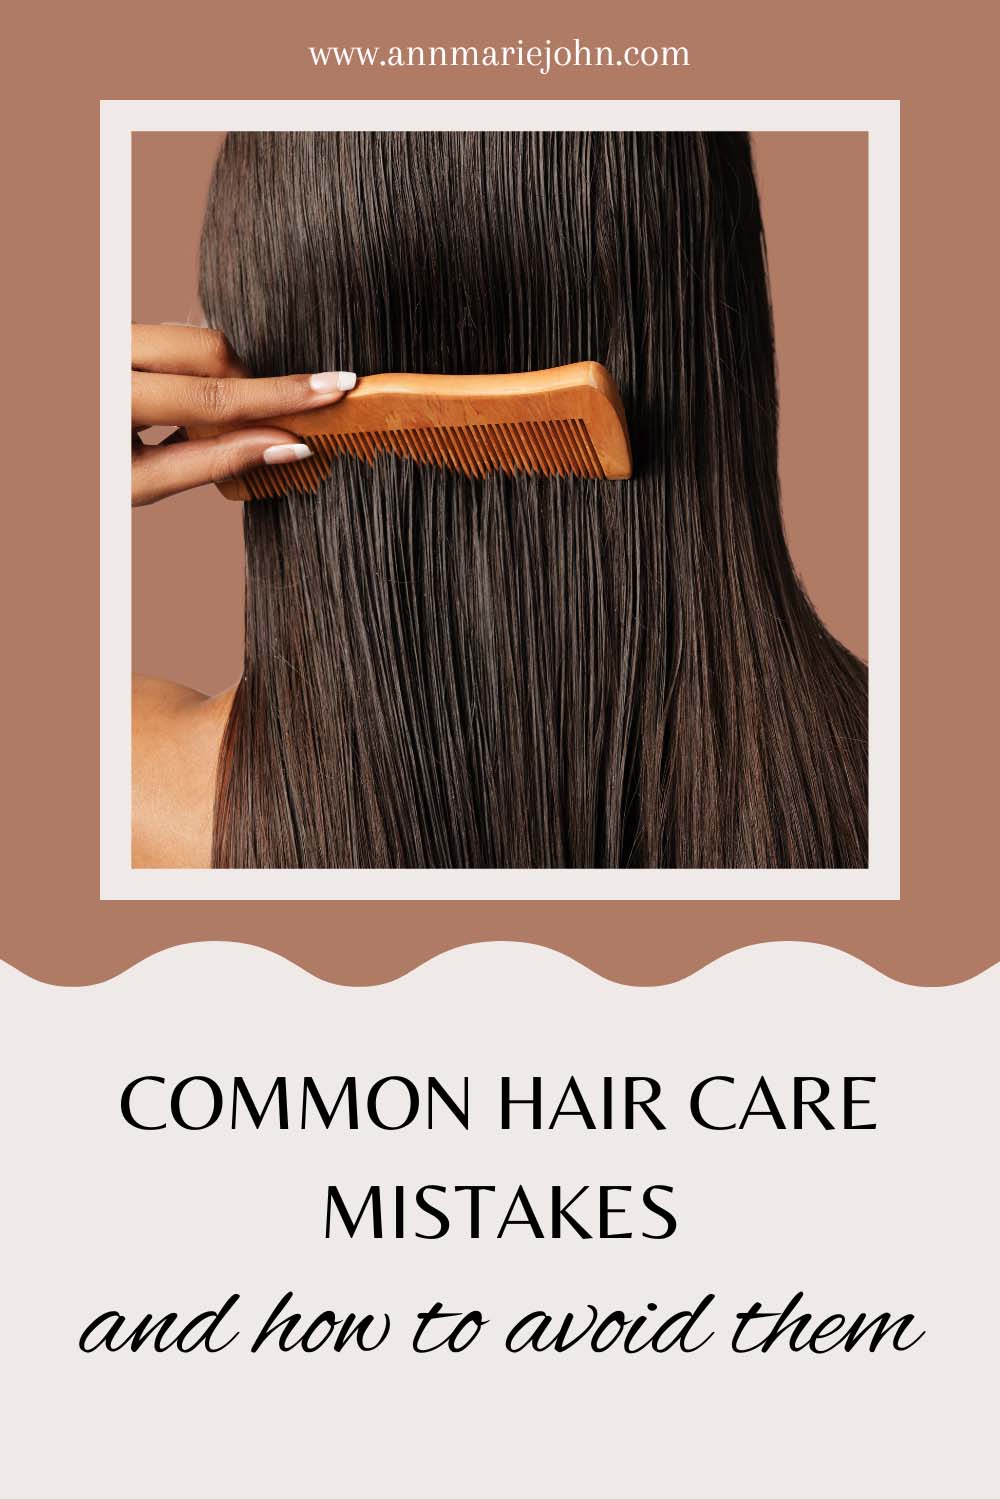 Common Hair Care Mistakes and How to Avoid Them